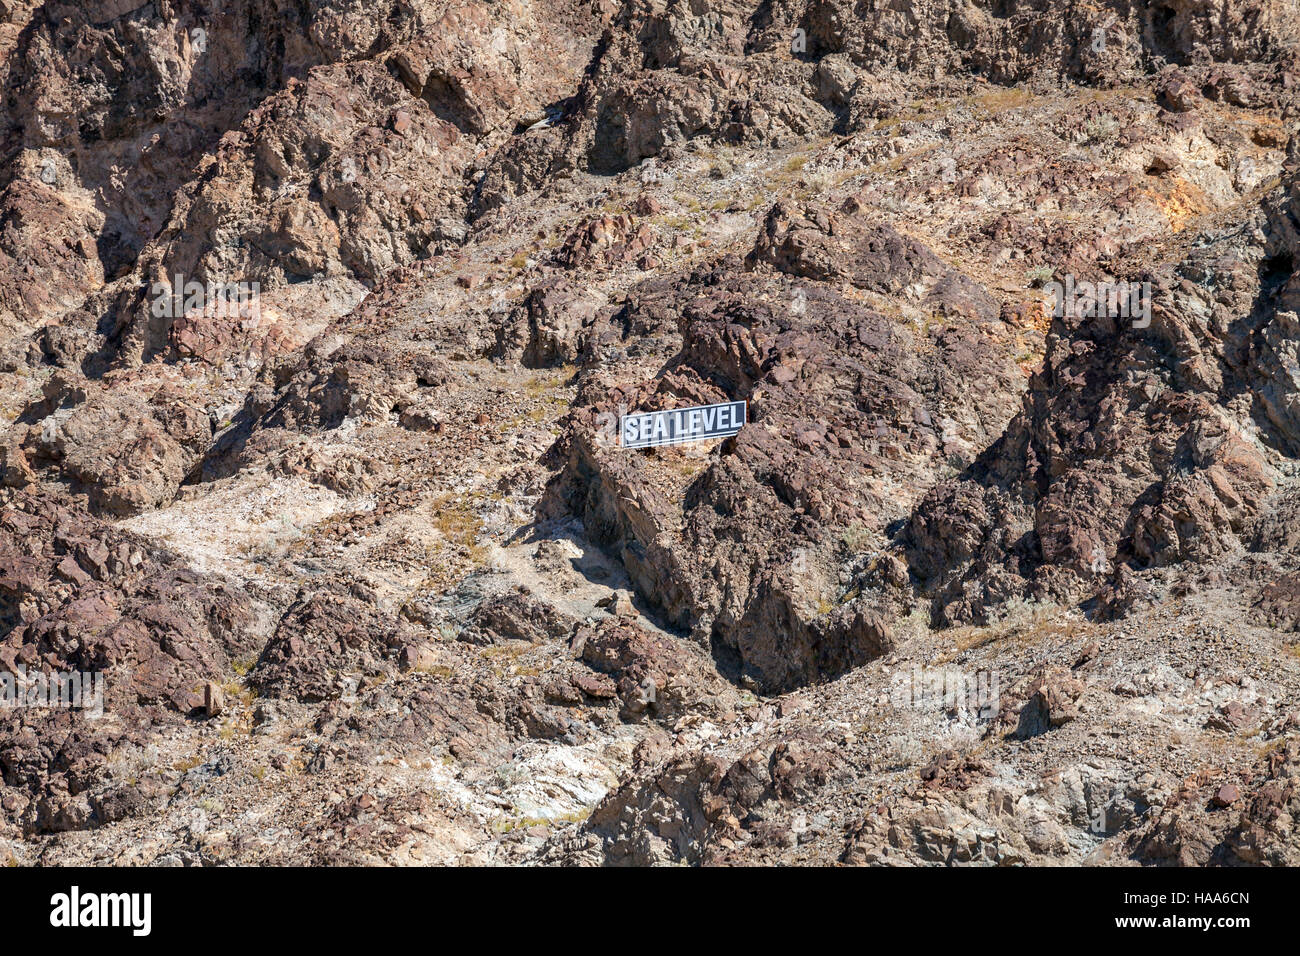 Sea Level sign on volcanic rock mountain,  Badwater Basin, Death Valley National Park, California, USA Stock Photo